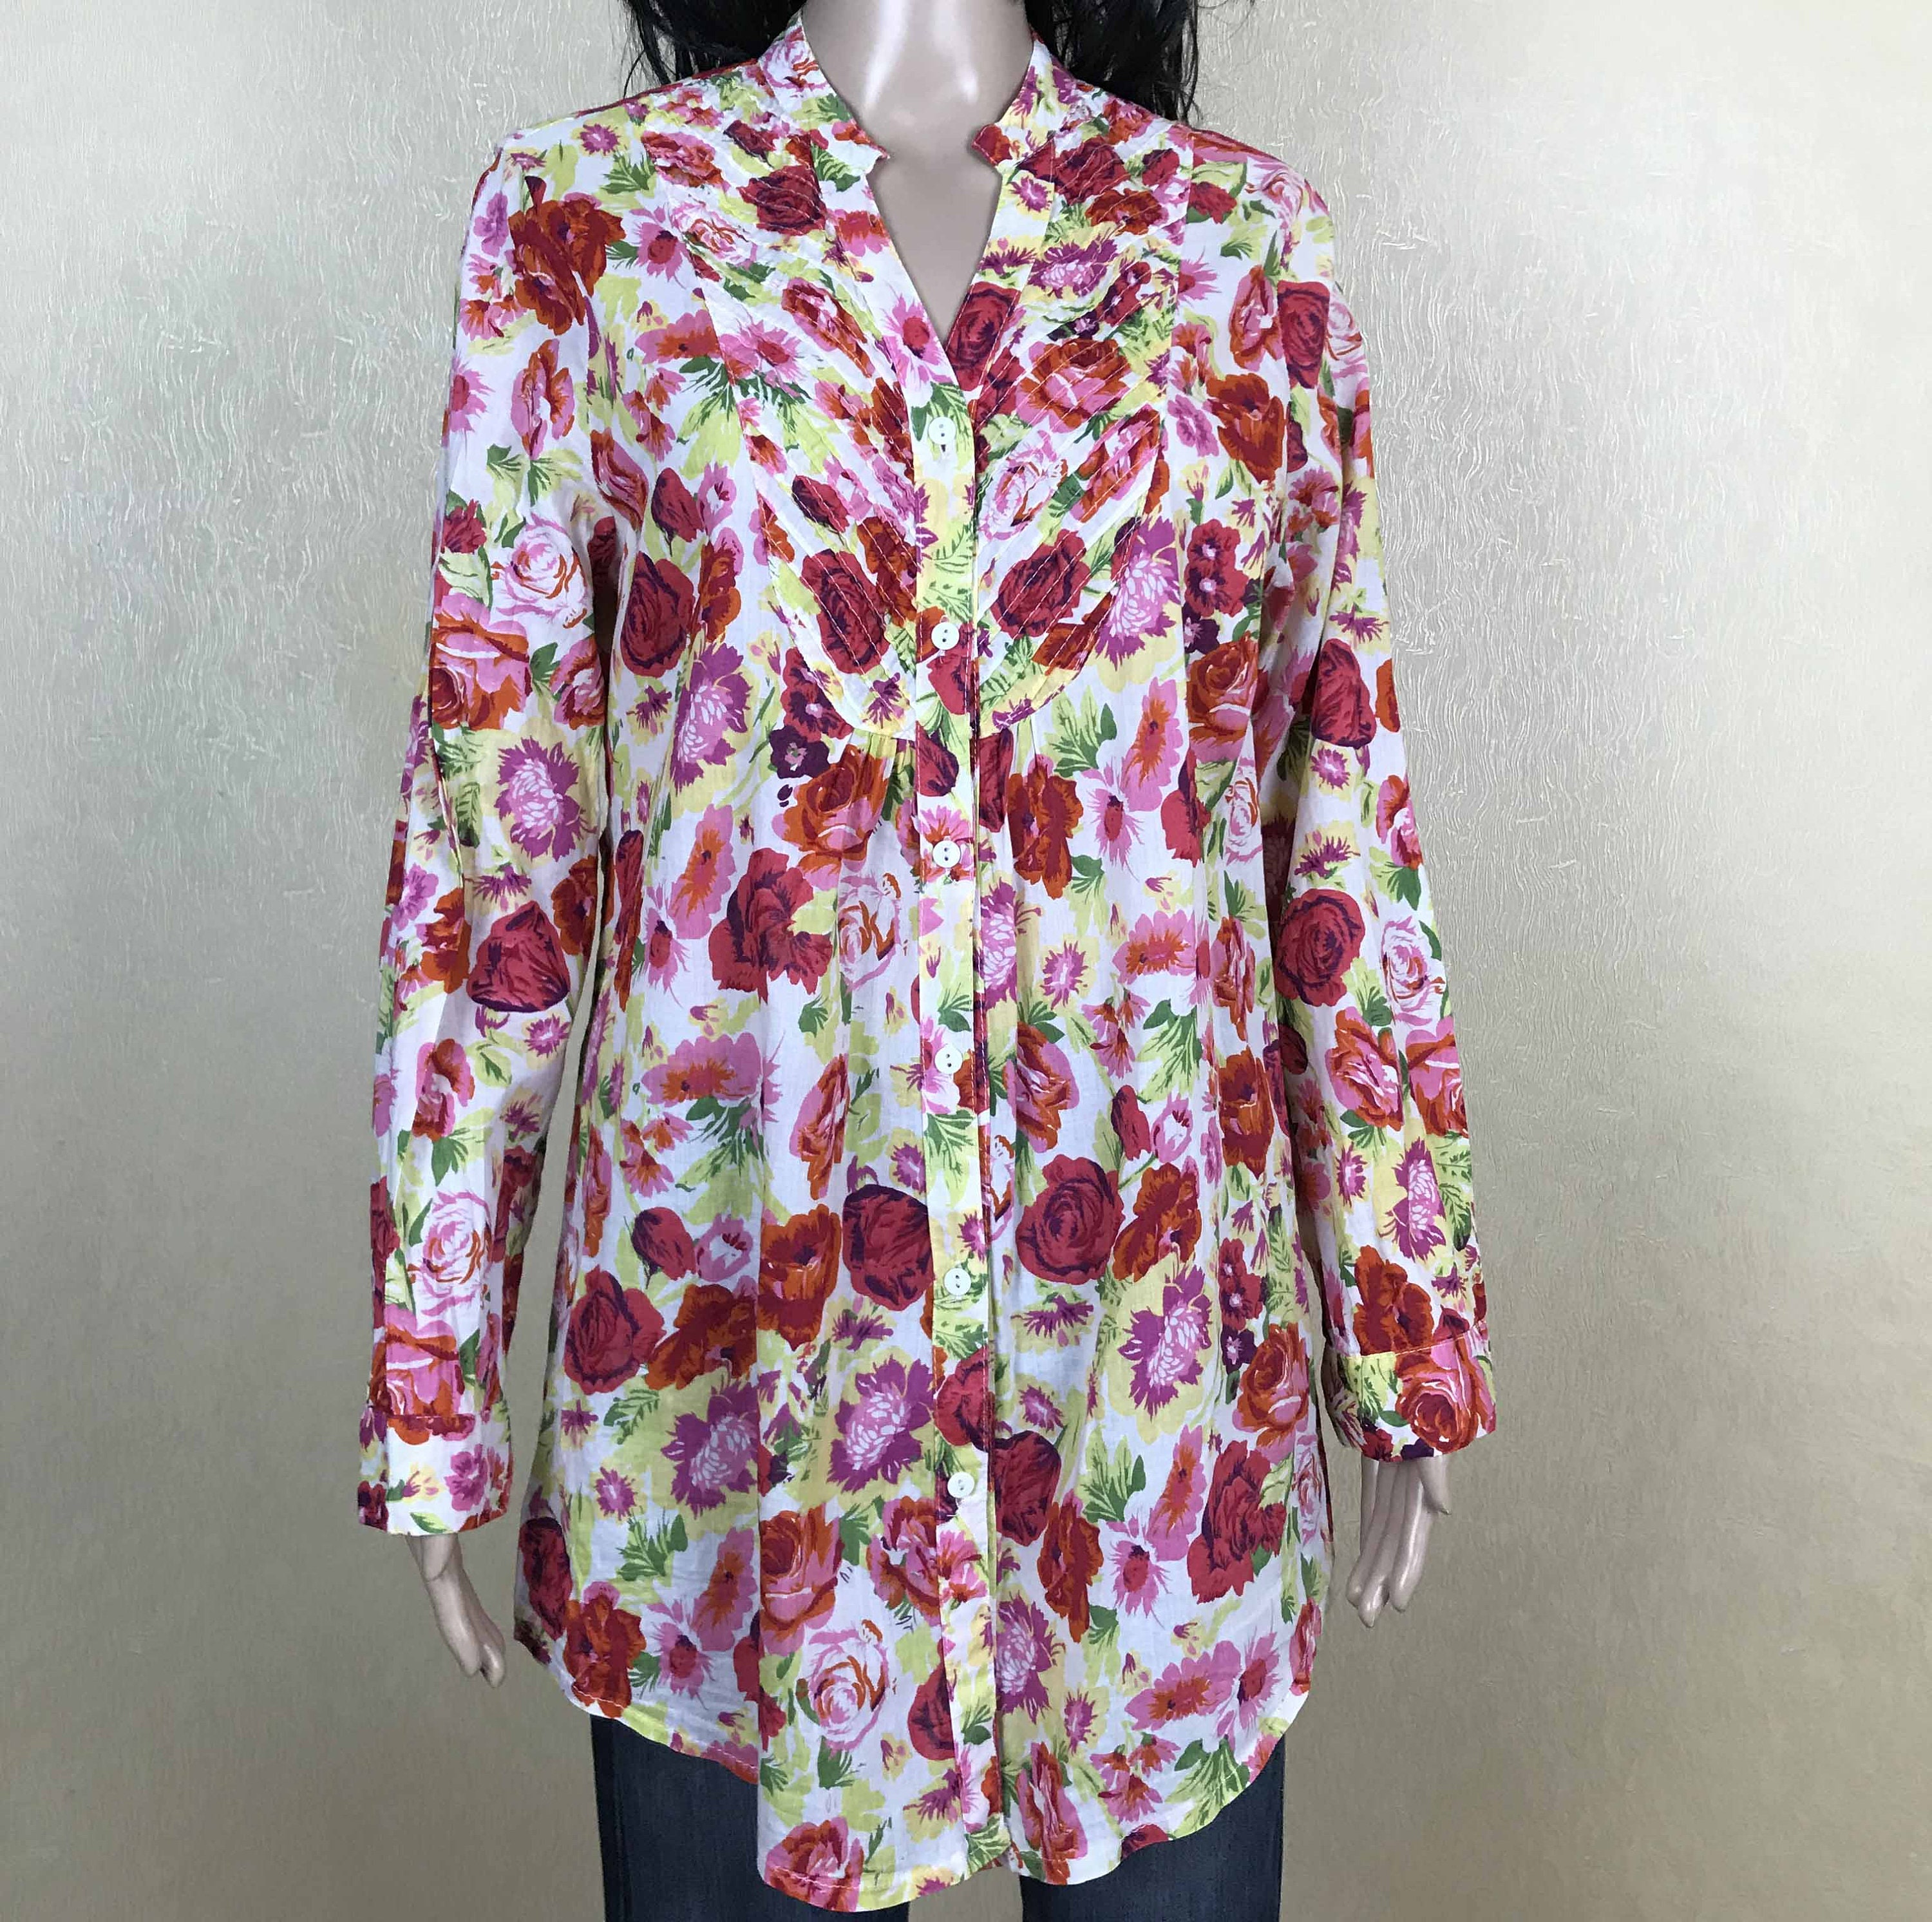 Women's floral tunic cotton summer blouse red flowers | Etsy